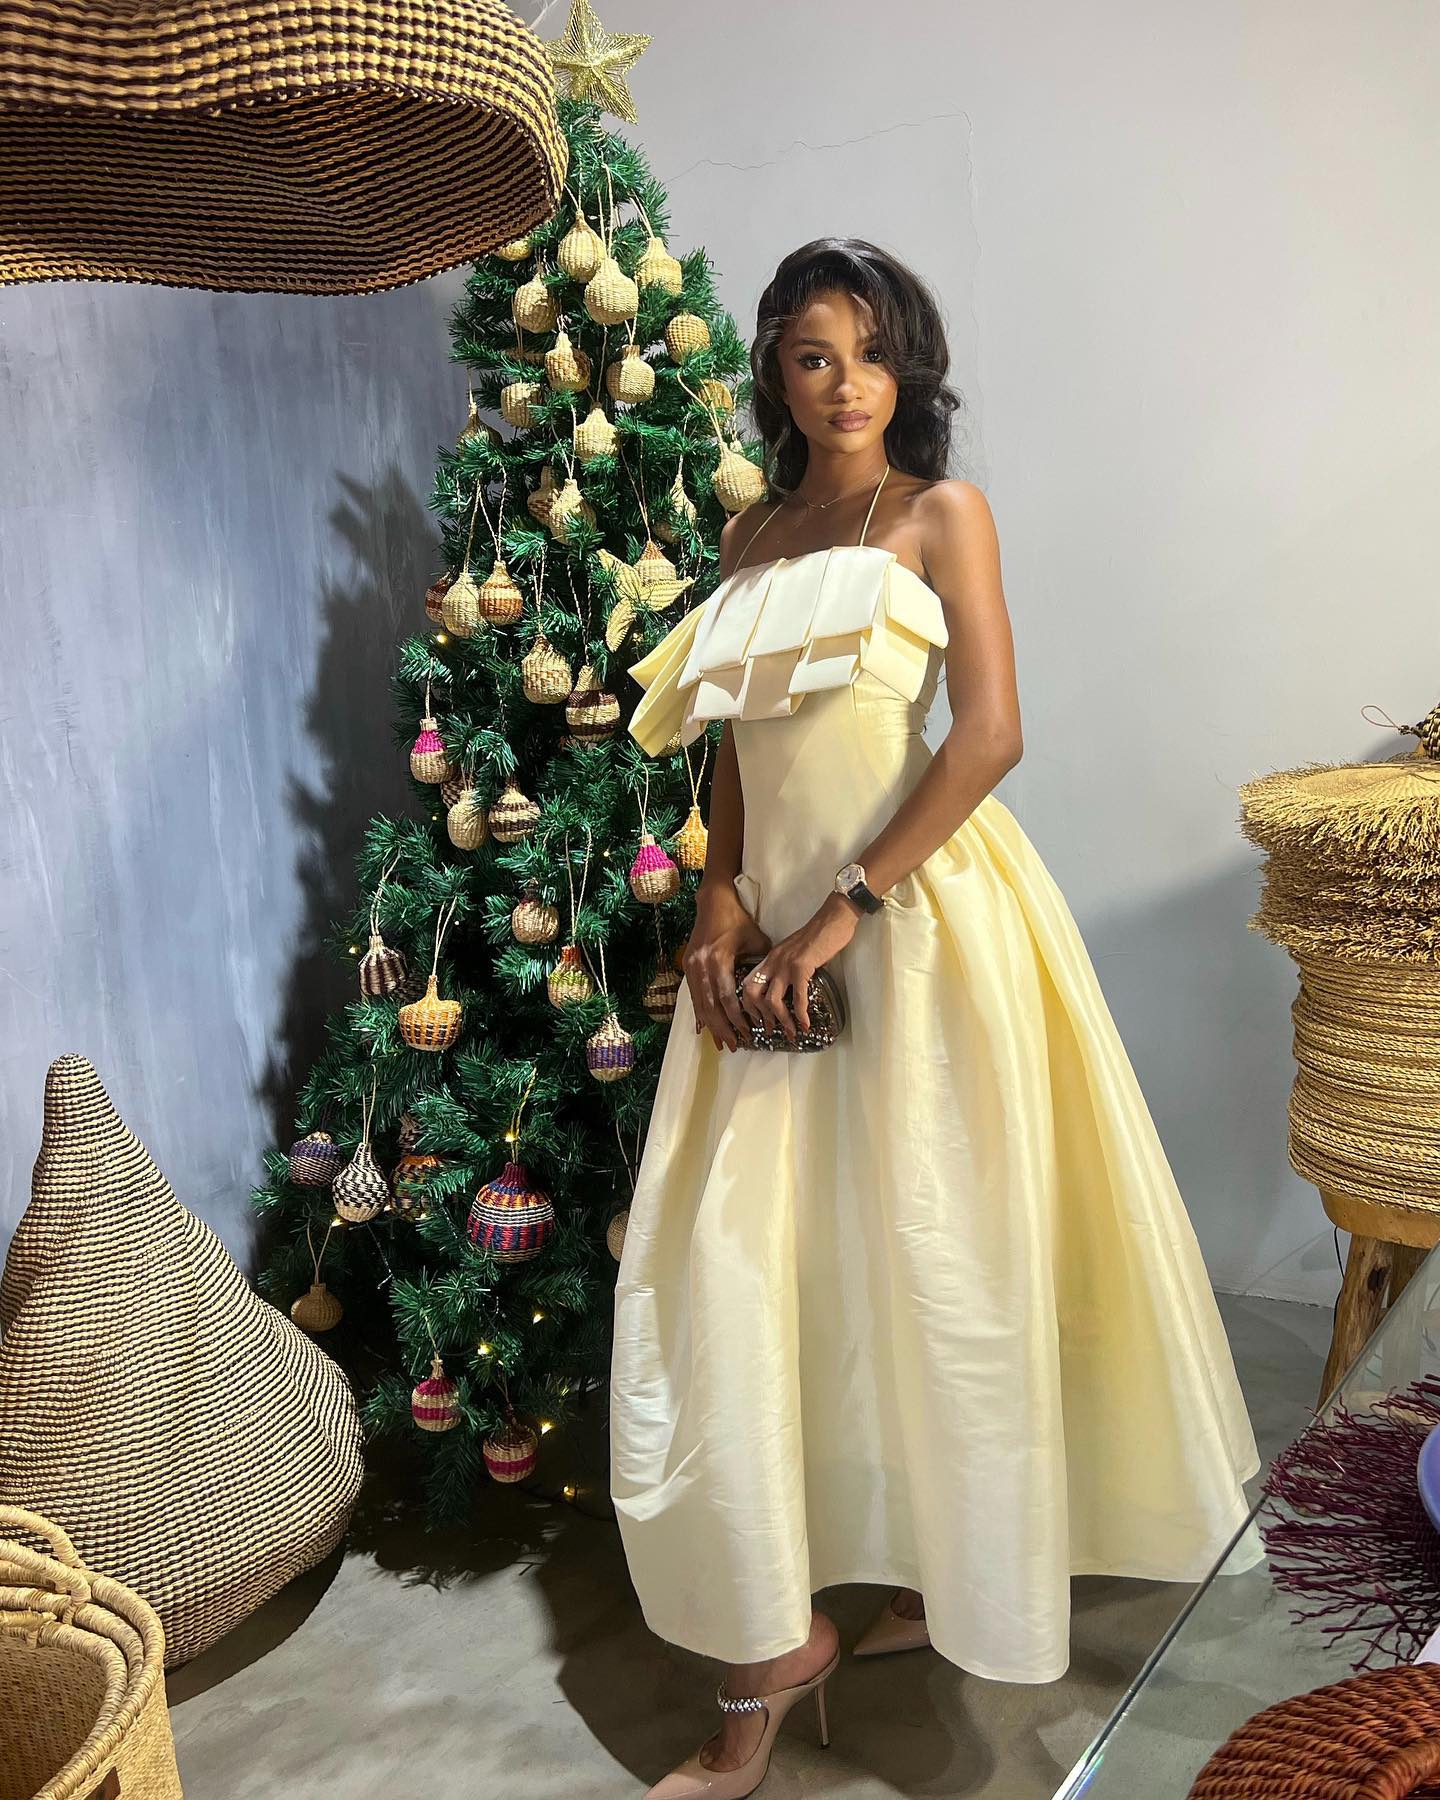 Abedi Pele's Daughter, Imani Ayew Bio: Age, Net Worth, Parents, Spouses, Instagram, Height, Siblings, Spouses